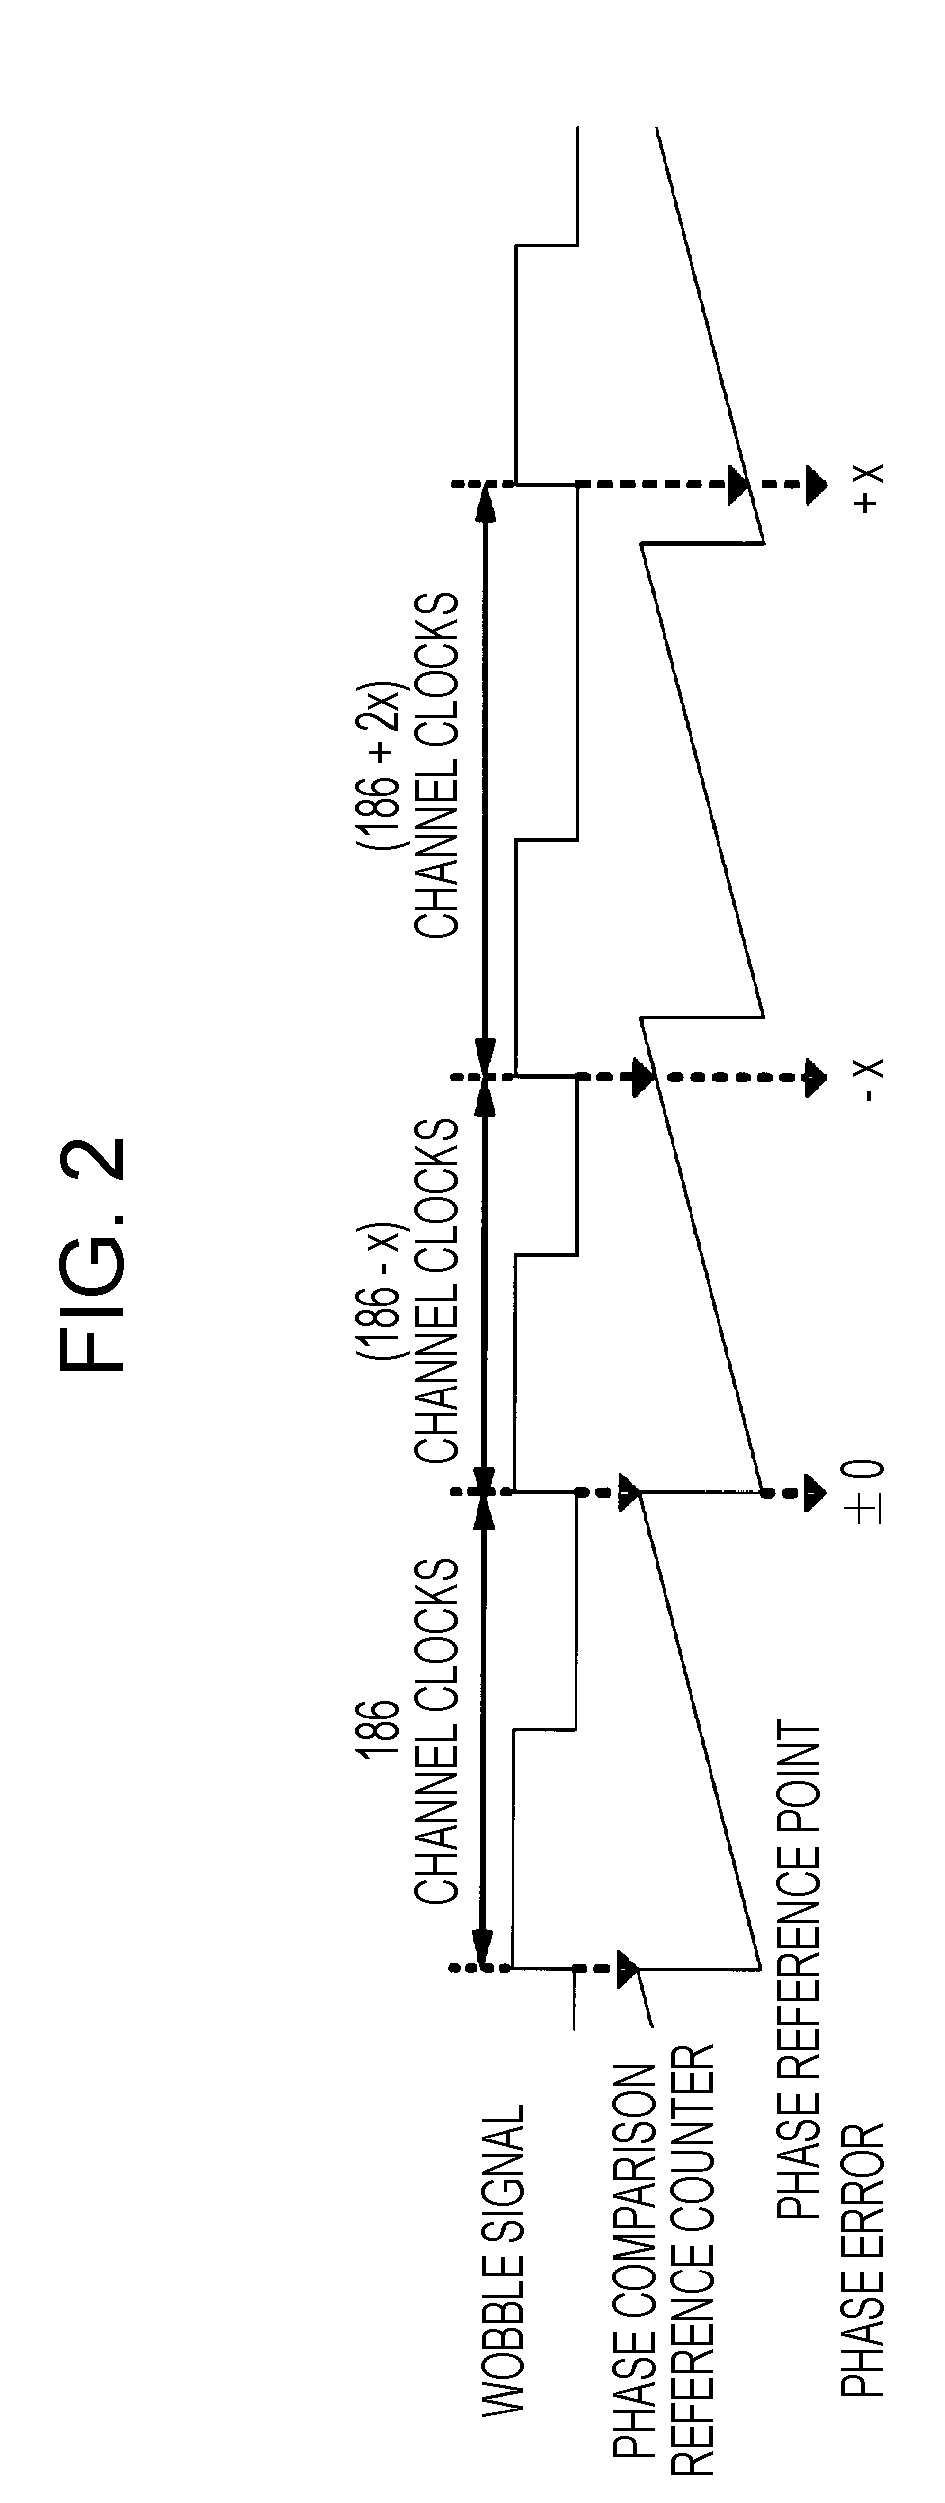 Optical disk recording method and optical disk recording apparatus